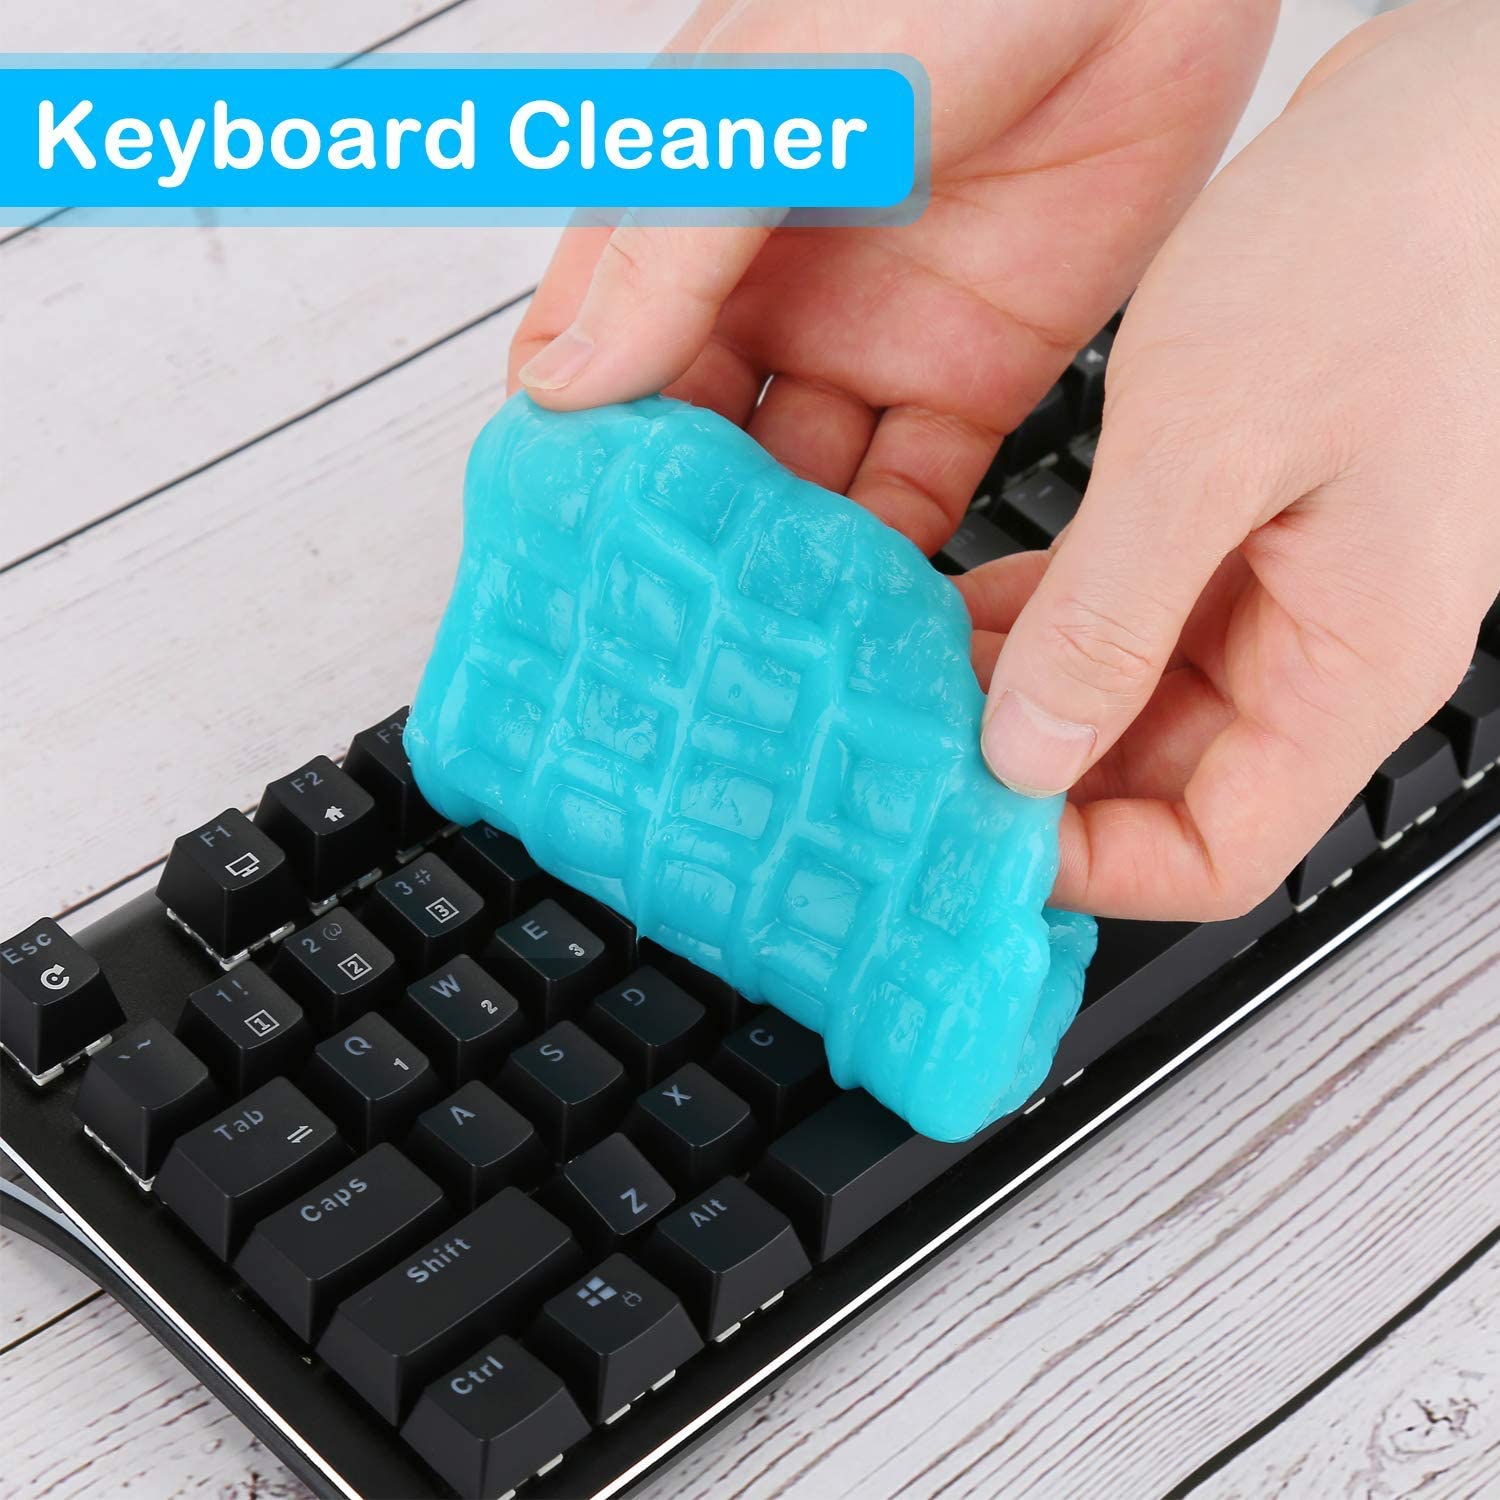 Universal Keyboard Cleaner Gel Jelly, Super Cleaning Gel Sticky Jelly Cleaner Dirt Cleaning Glue for PC, Laptop, Air Vent, Furniture, Computer, Size